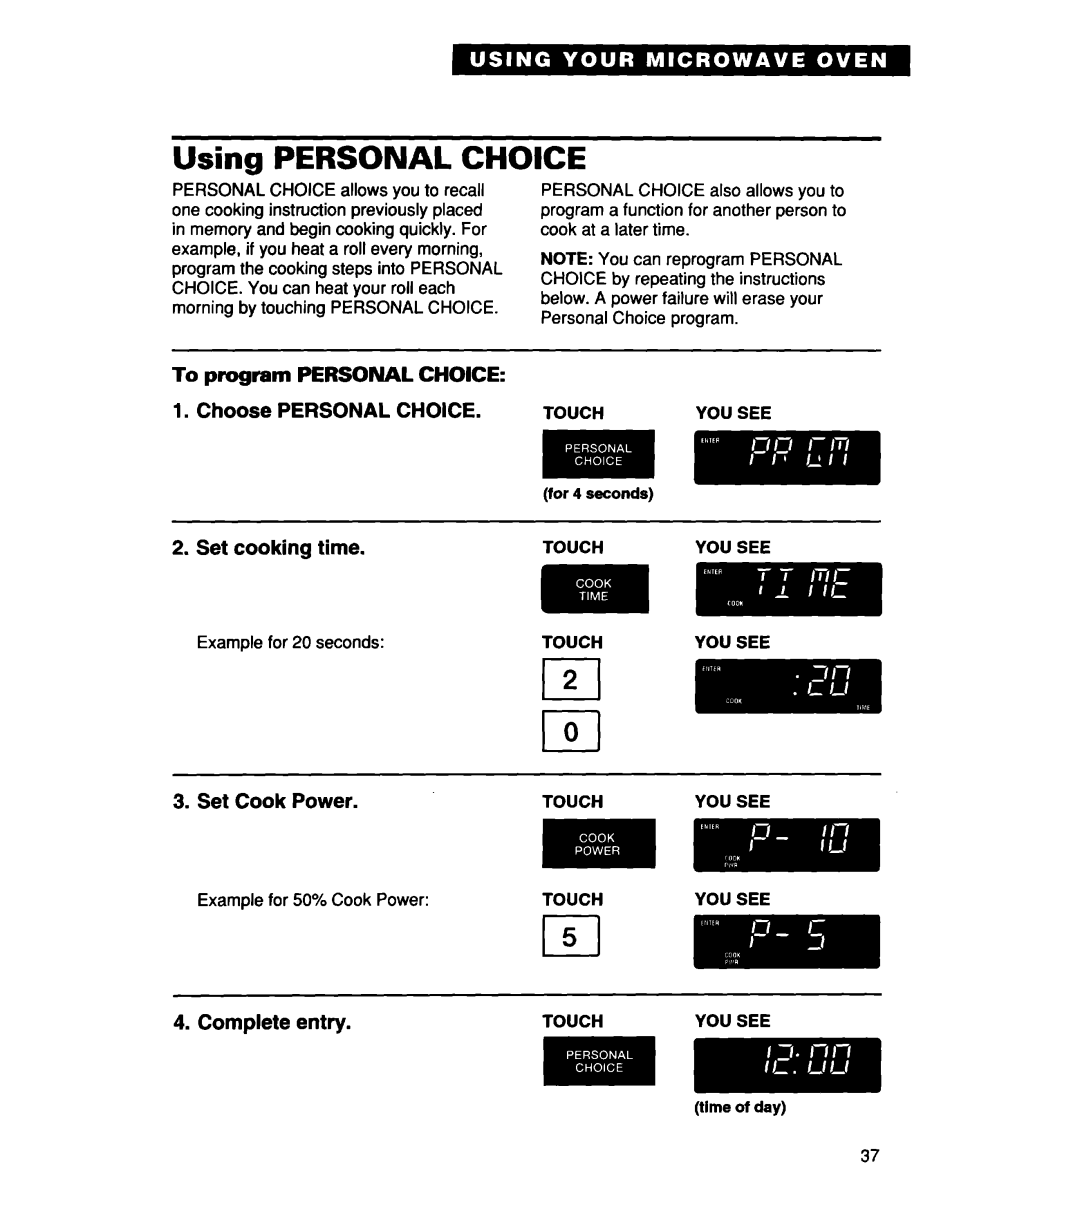 Whirlpool MH7135XE warranty Using PERSONAL CHOICE, To program PERSONAL CHOICE, Choose PERSONAL CHOICE 2.Set cooking time 